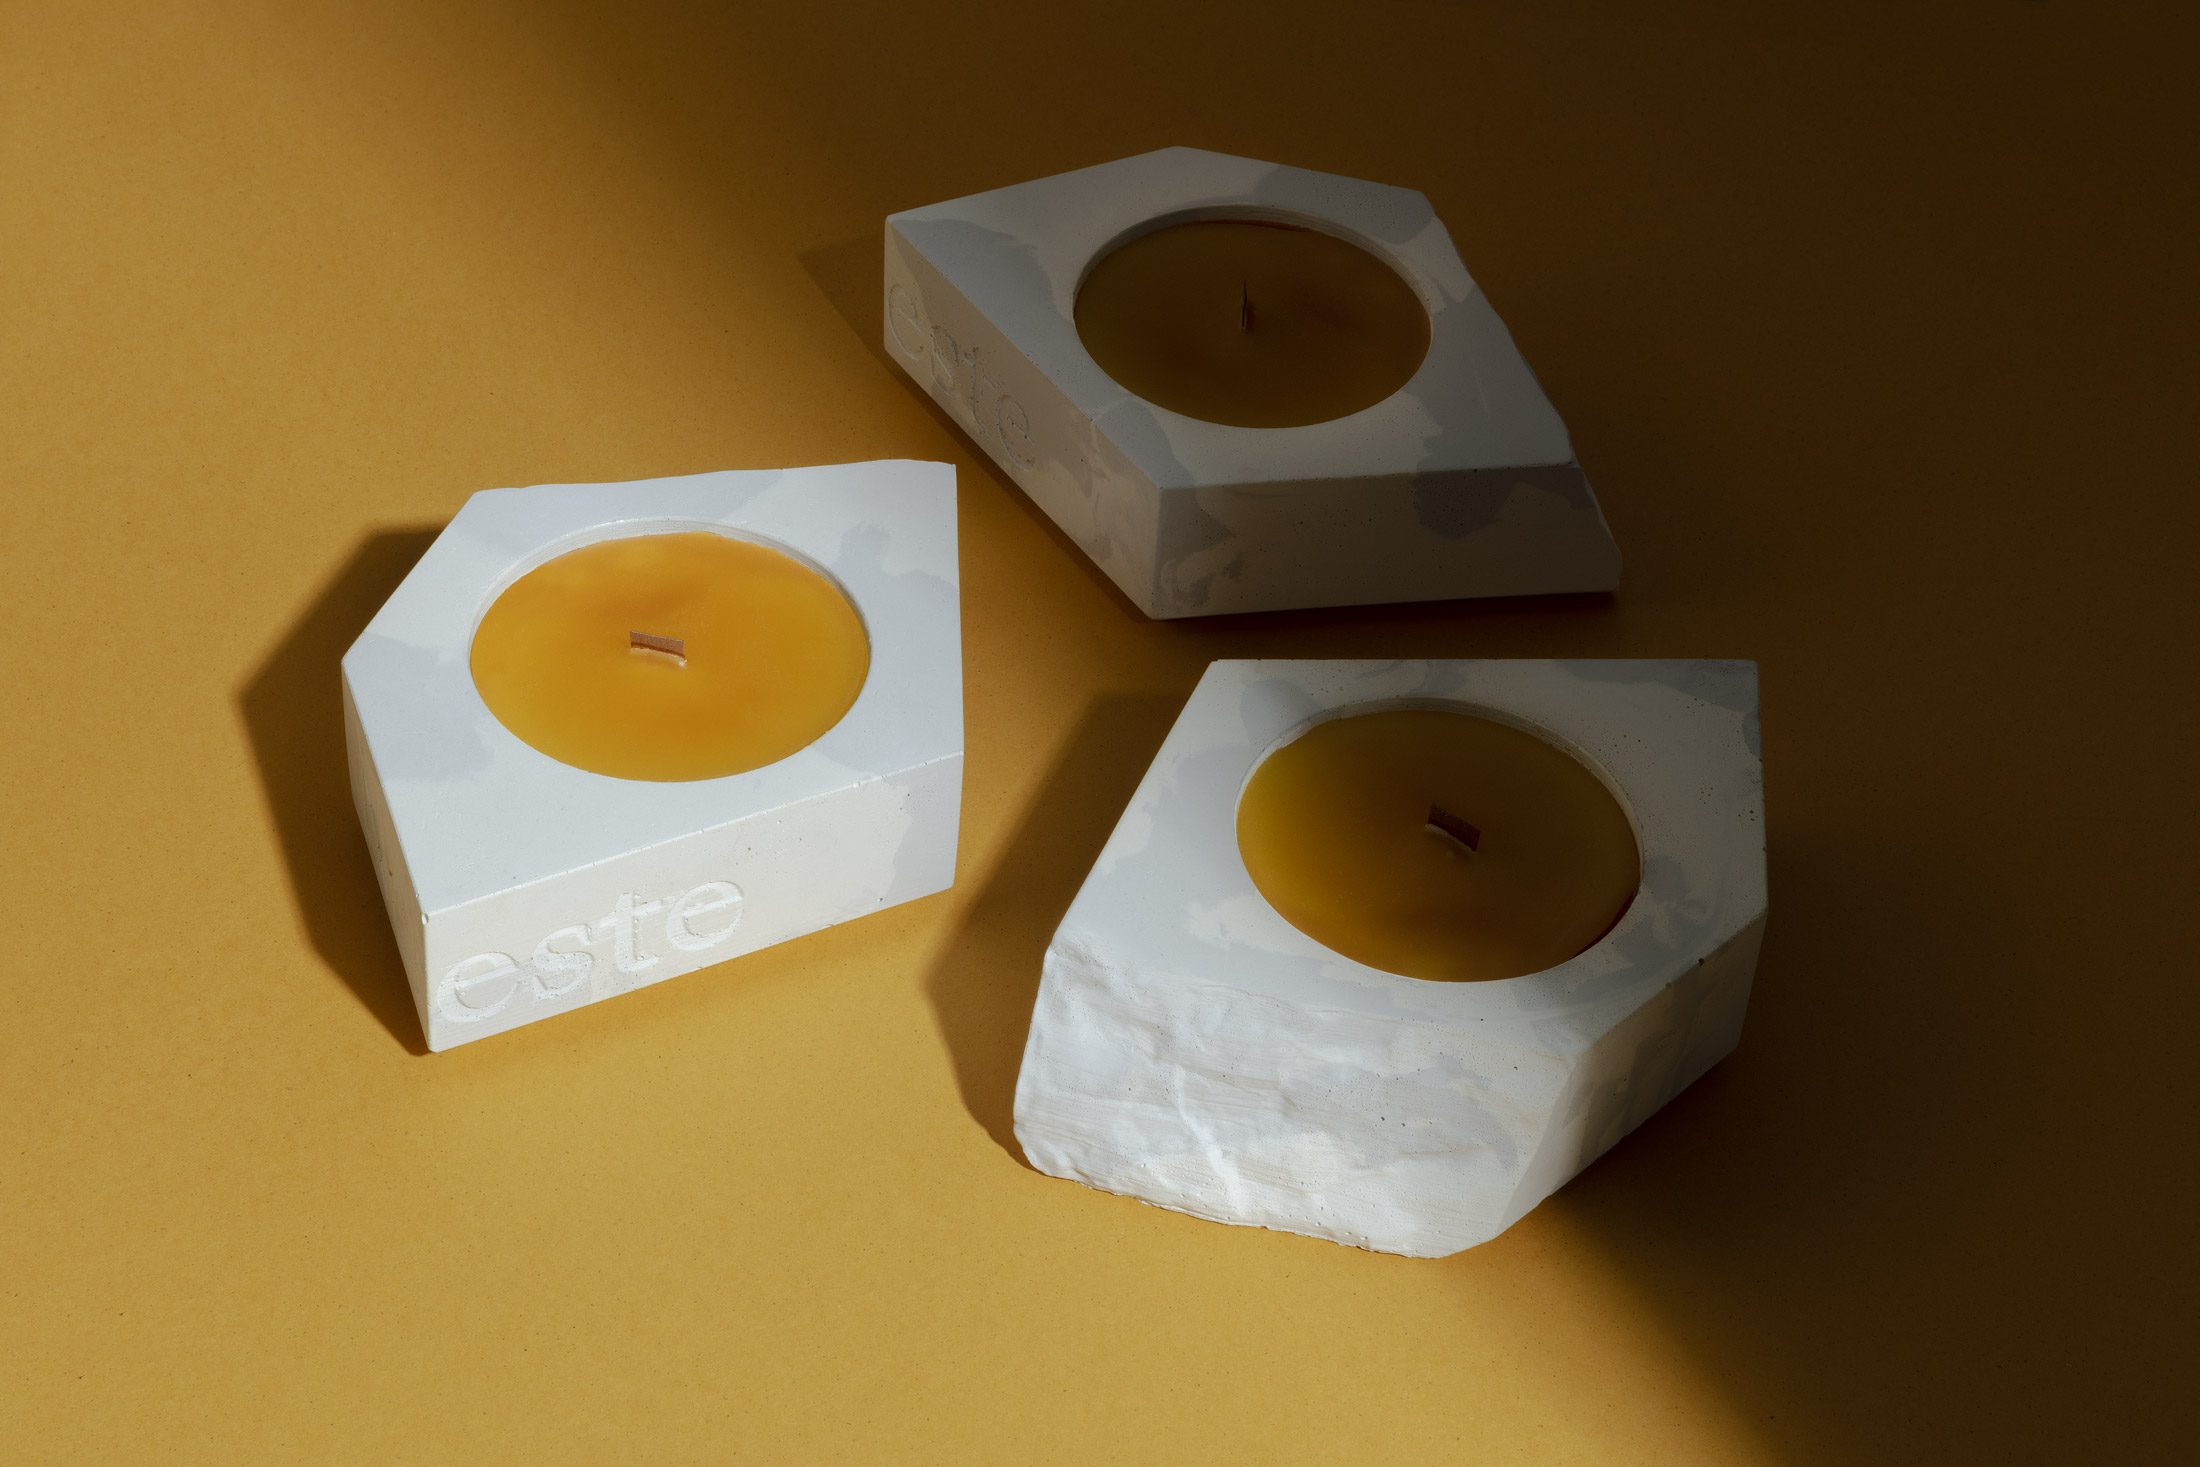 09.Recycled-candle-noreste-agency